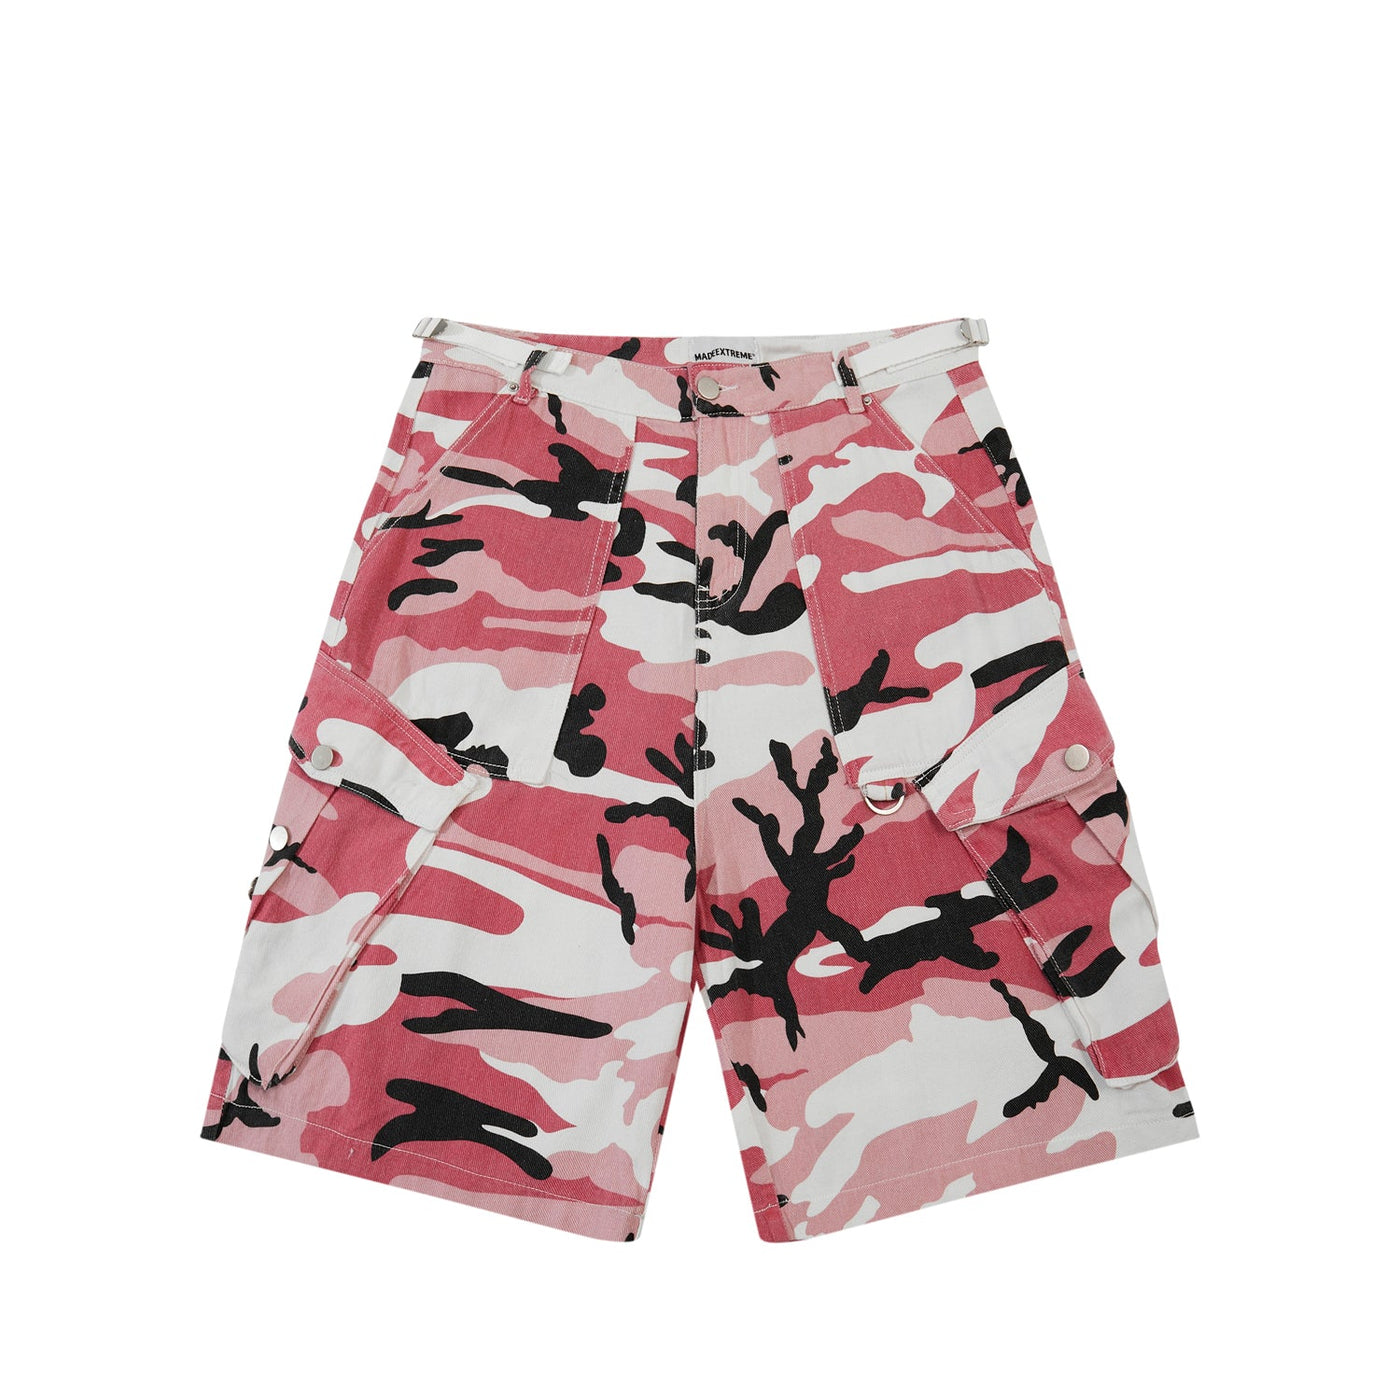 Buttoned Pocket & Camouflage Shorts Korean Street Fashion Shorts By Made Extreme Shop Online at OH Vault